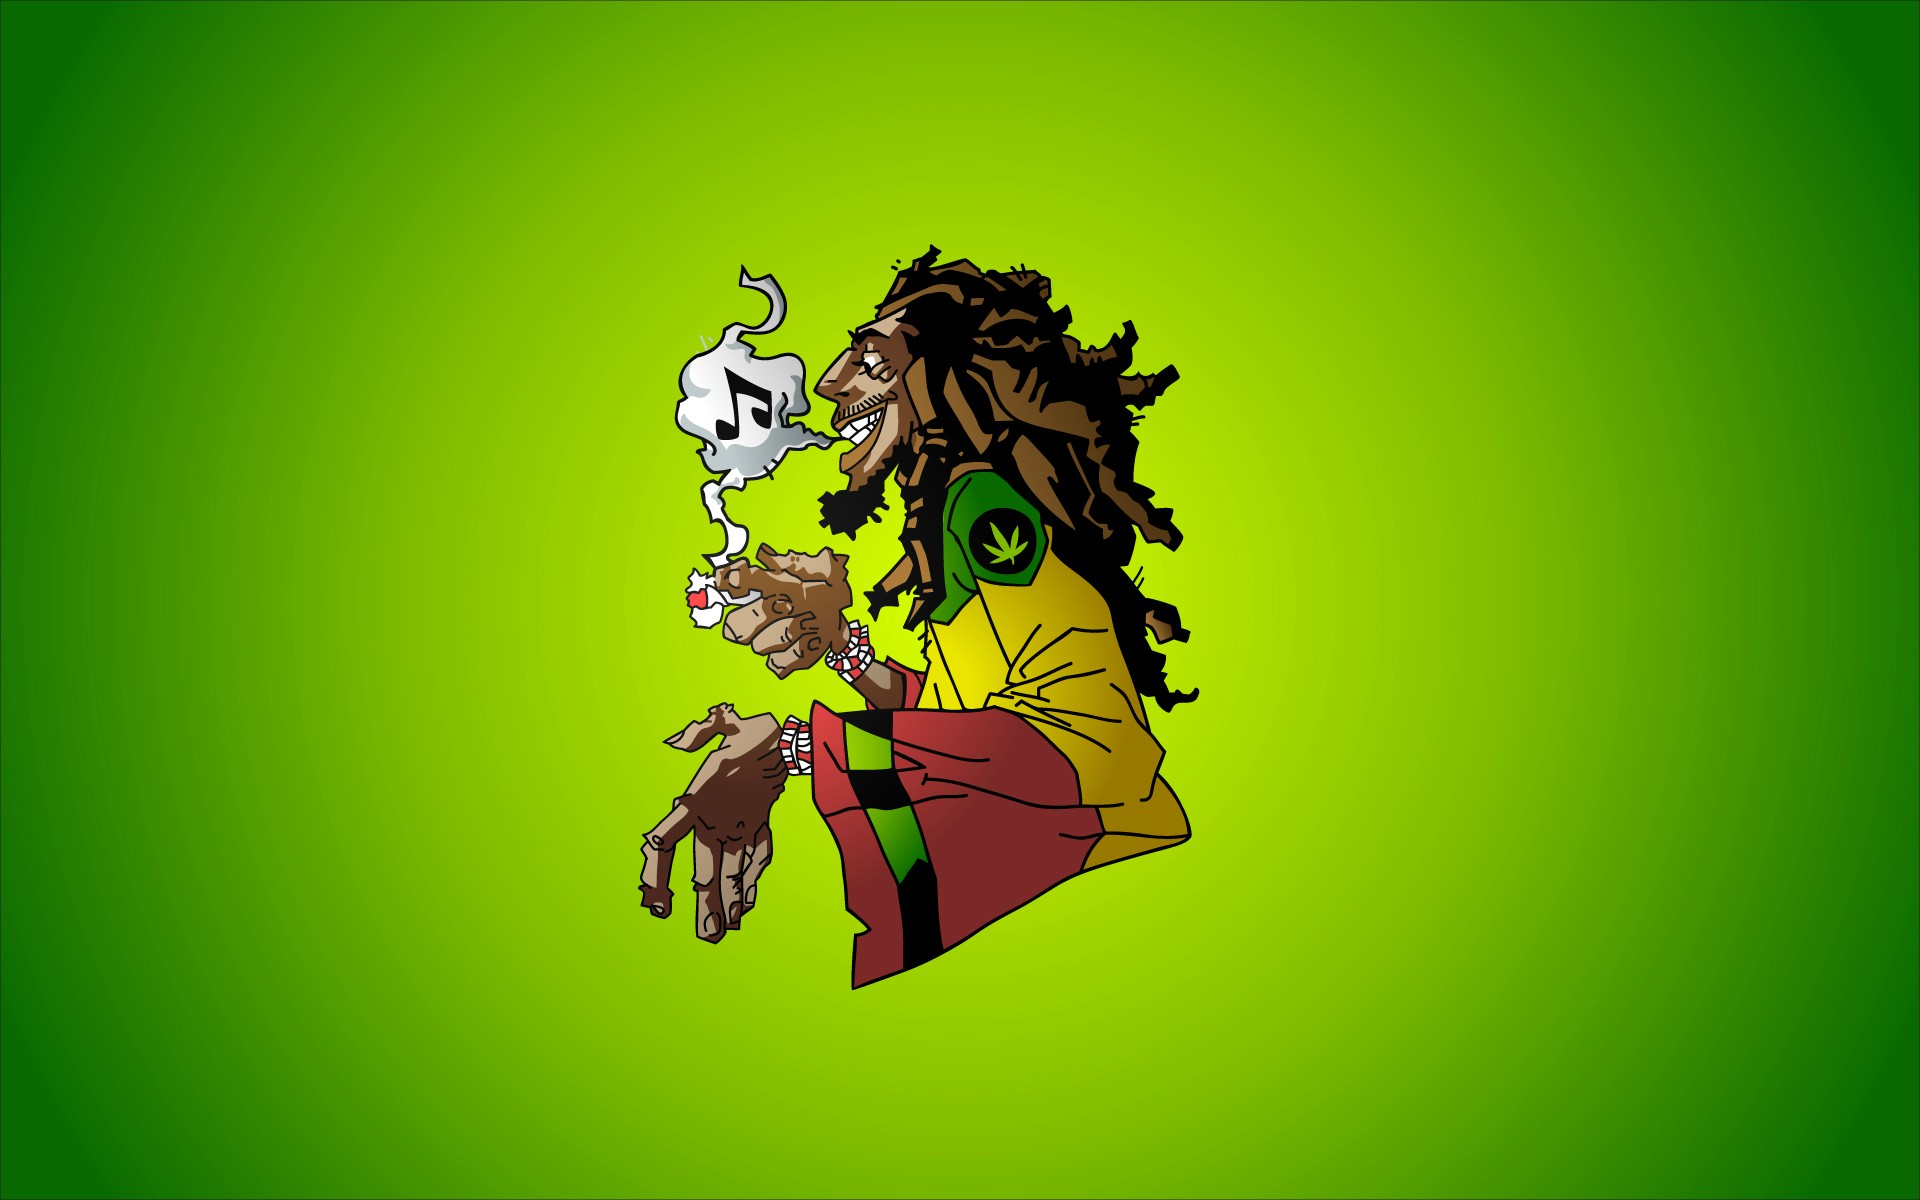 Weed Desktop Wallpaper HD Background Of Your Choice